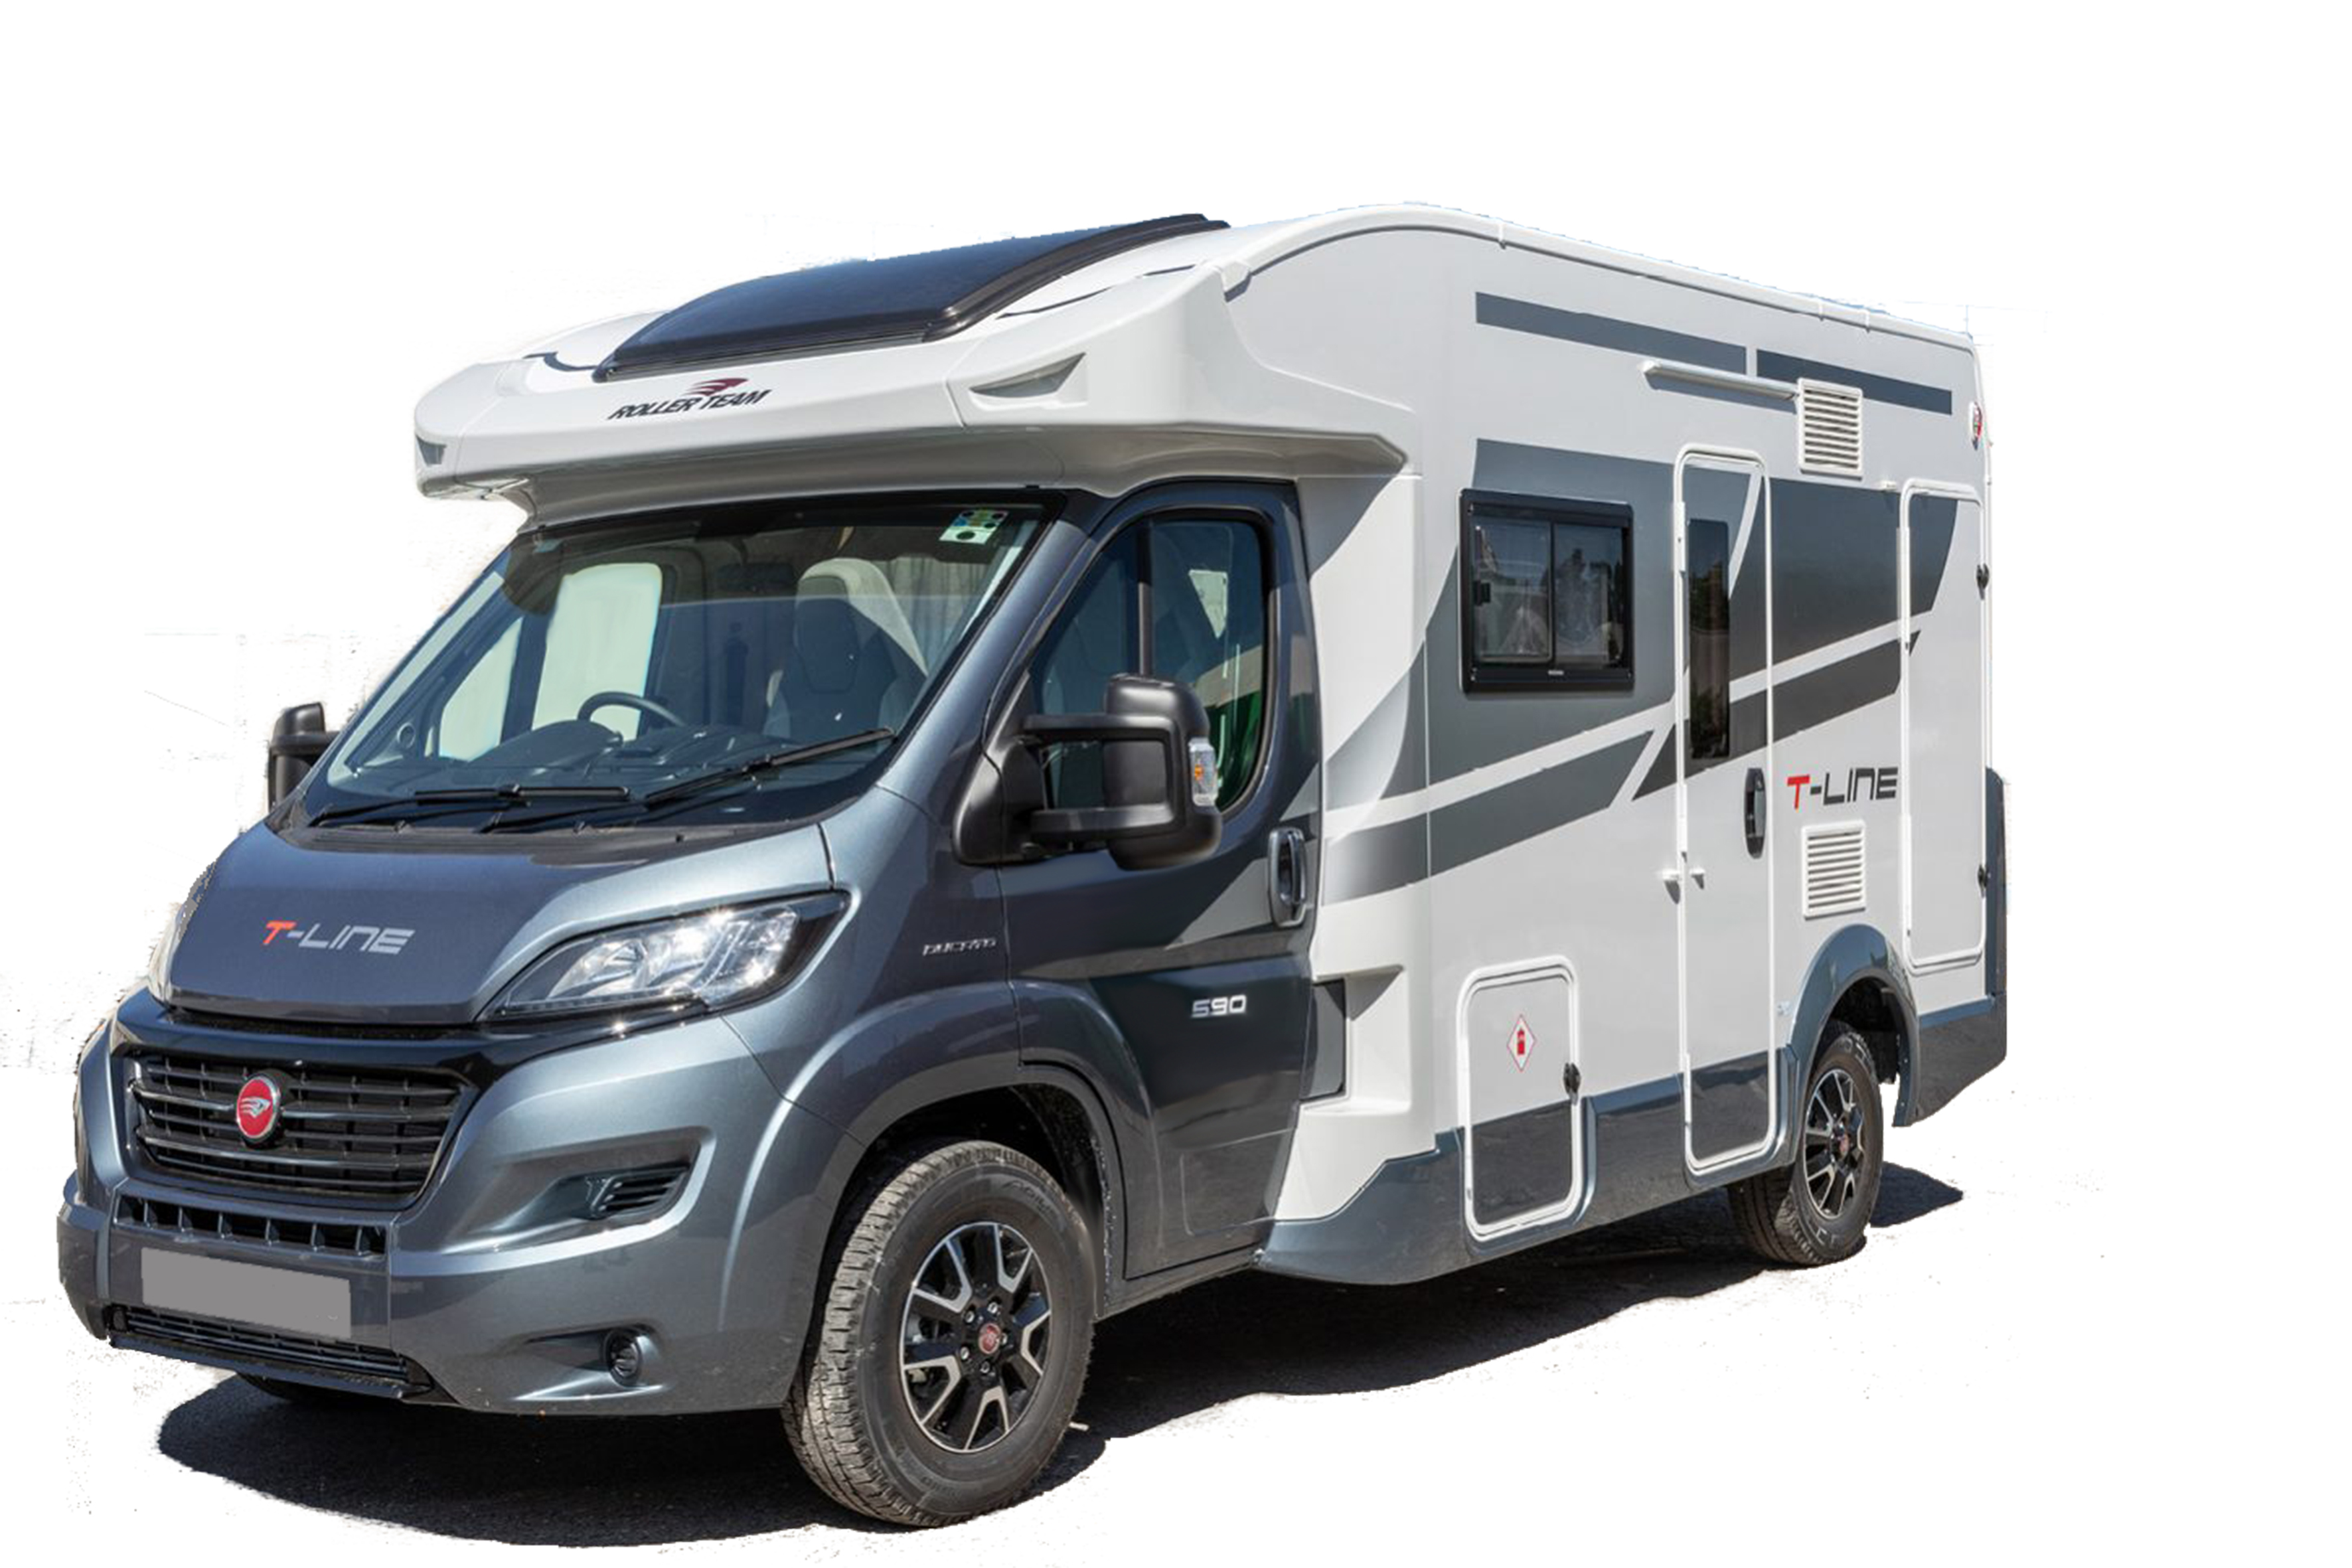 2020 Roller Team T-Line 590 (Automatic) New Motorhome external view